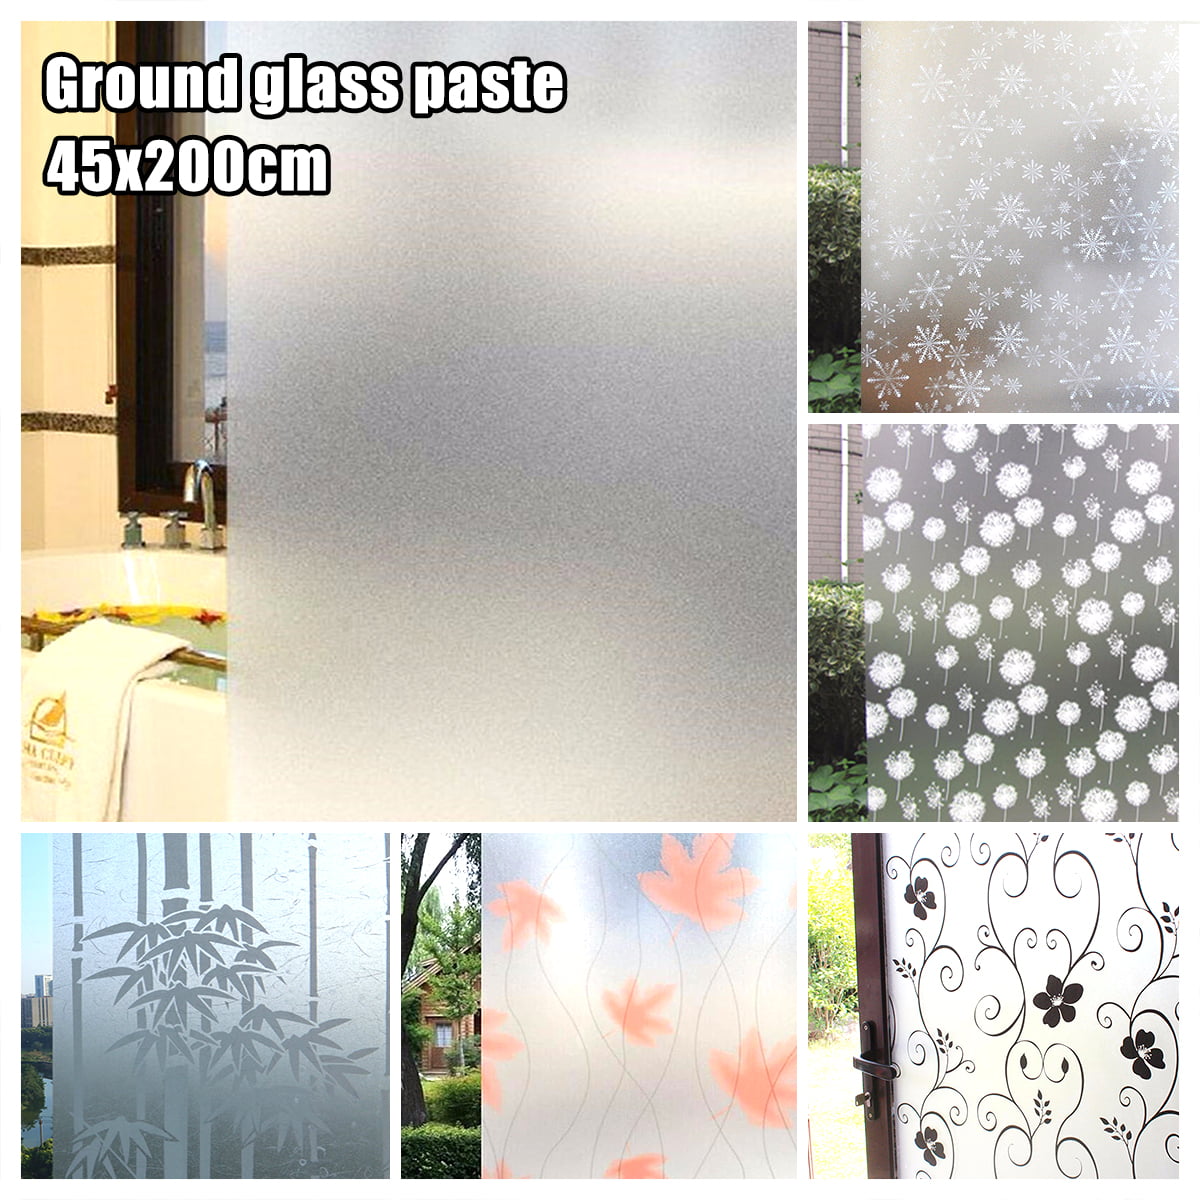 Waterproof Frosted Privacy Window Glass Cling Cover Film Home PVC Sticker # HOT 